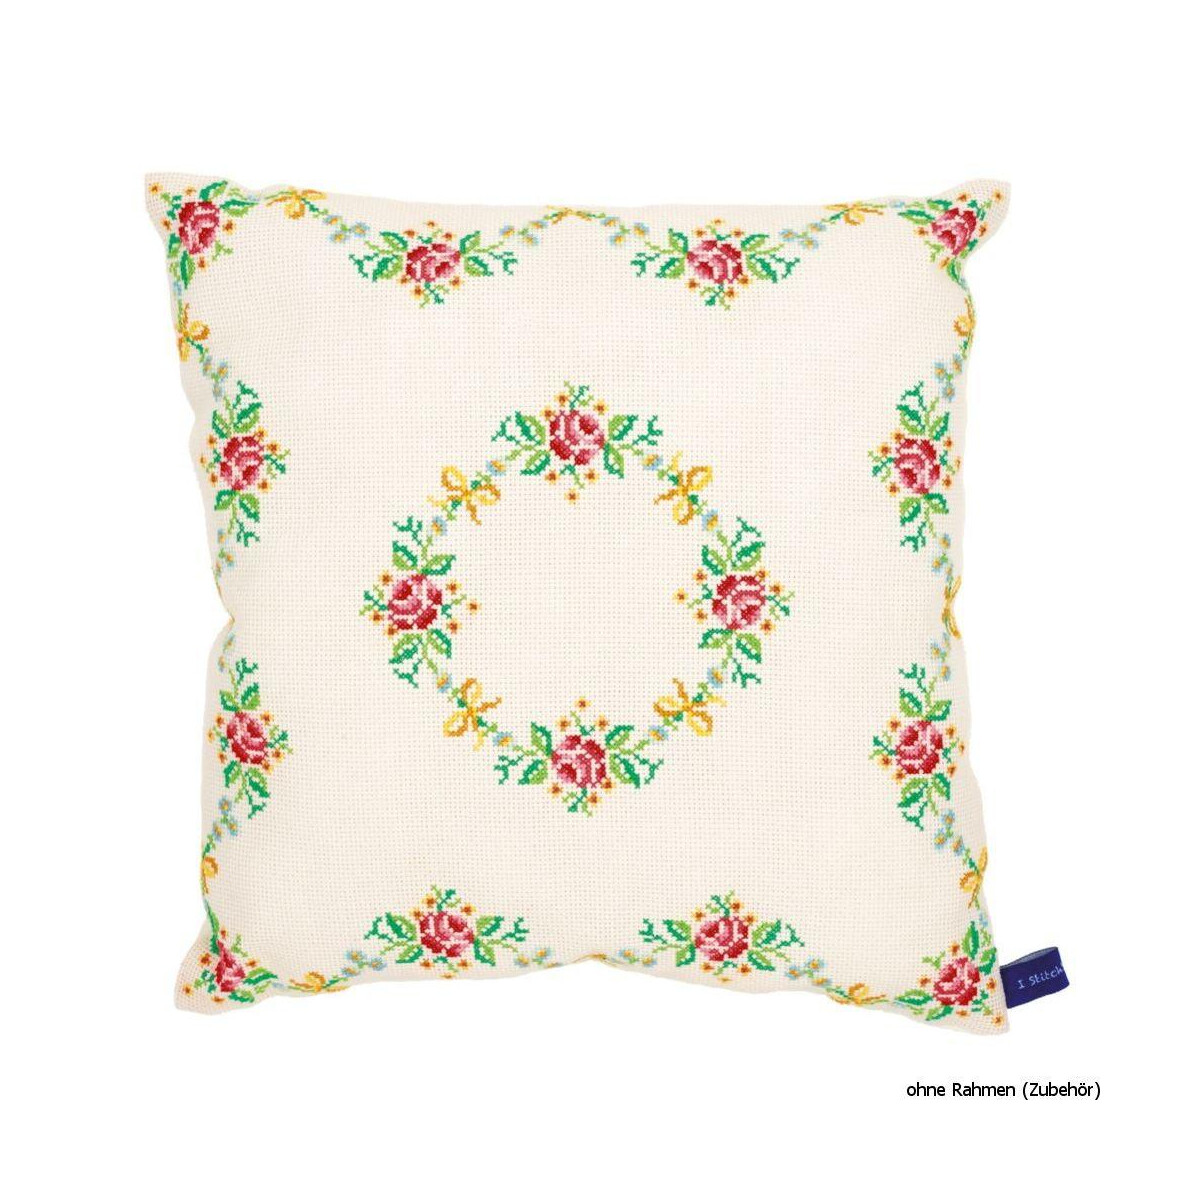 Vervaco cushion counted stitch kit "Garland with...